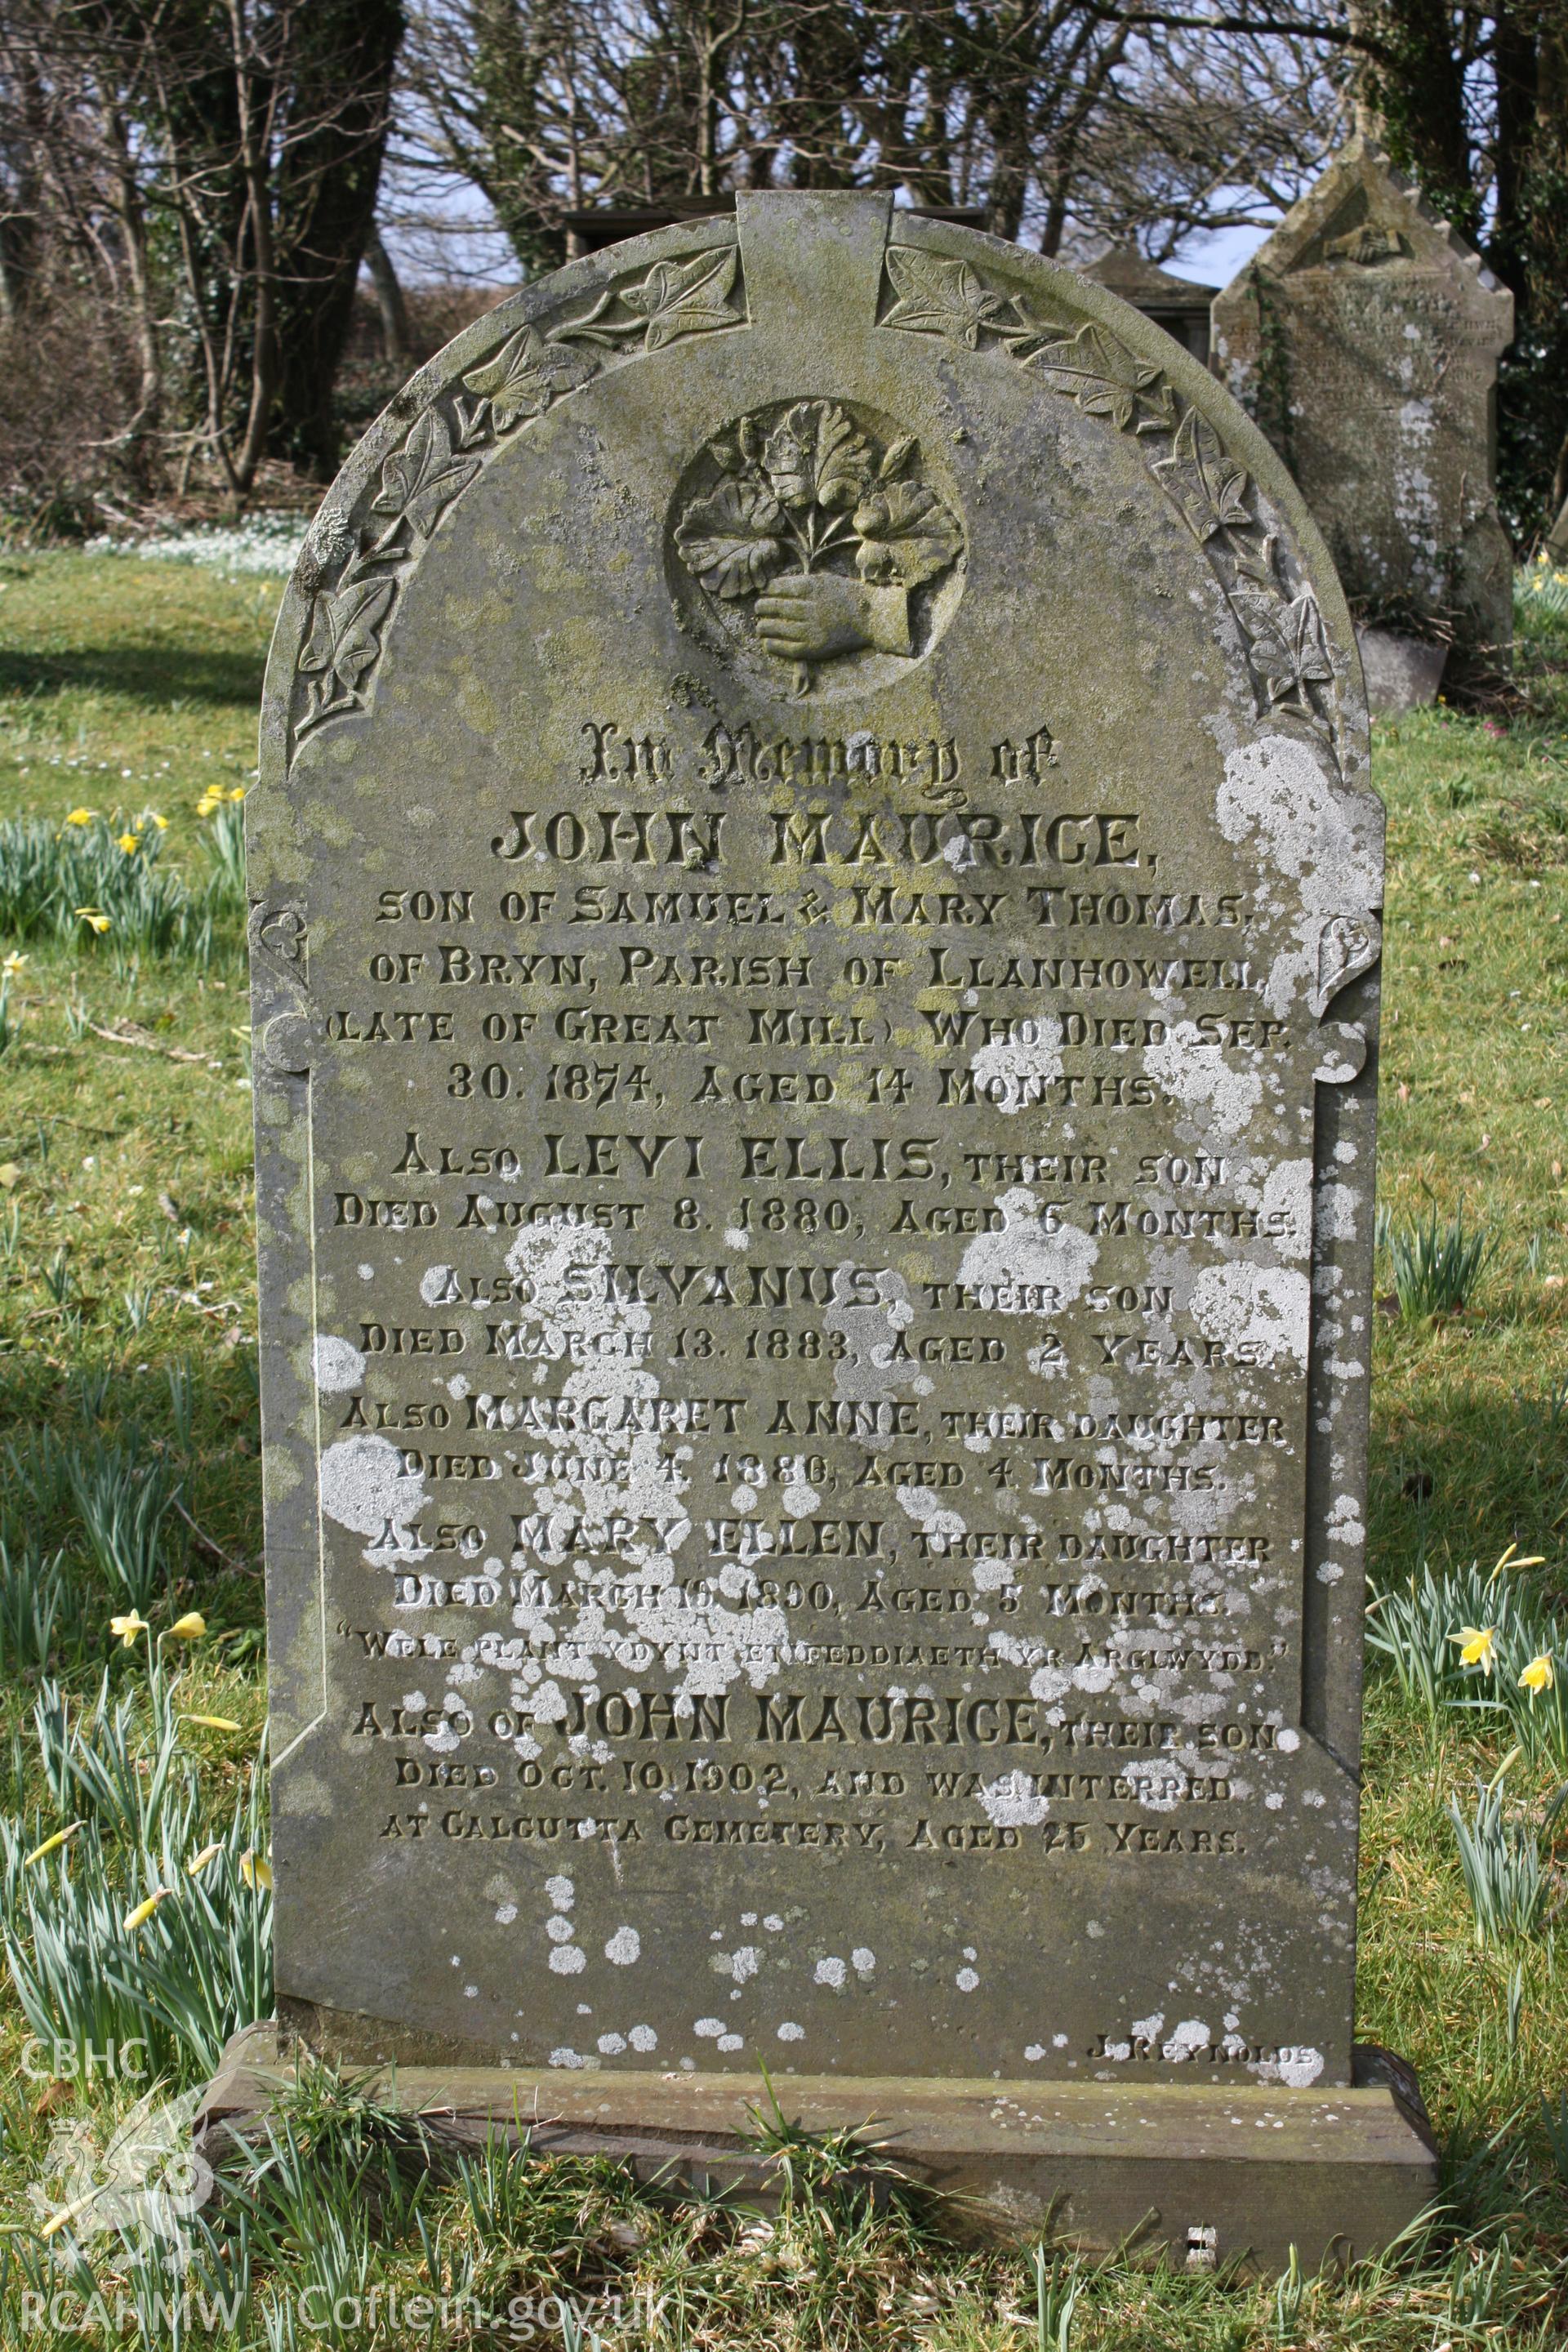 Gravestone commemorating five infants from the Thomas family